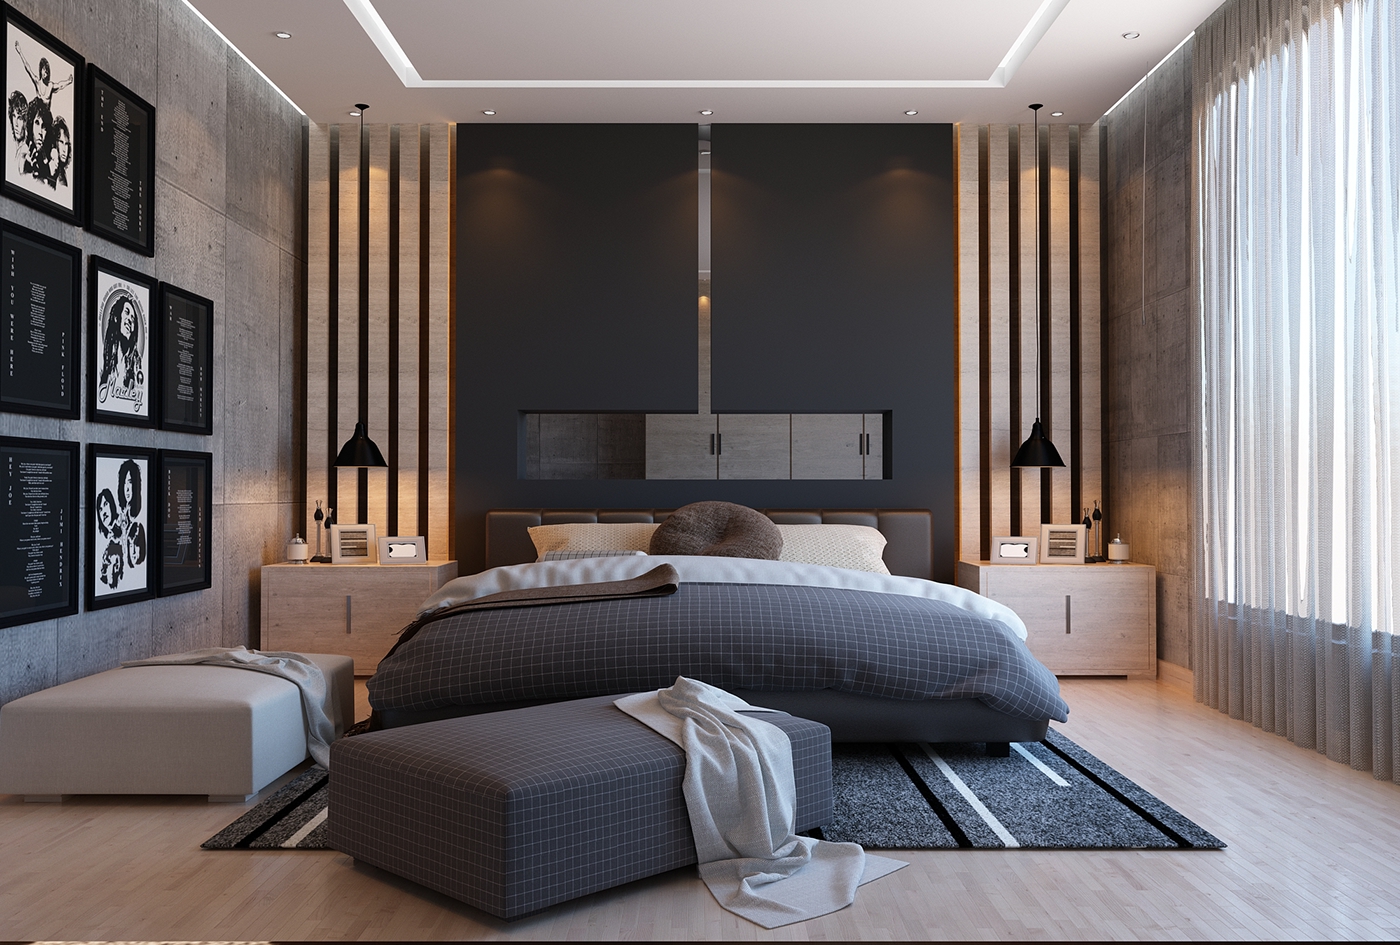 Black Bedroom Decorating Ideas With Color